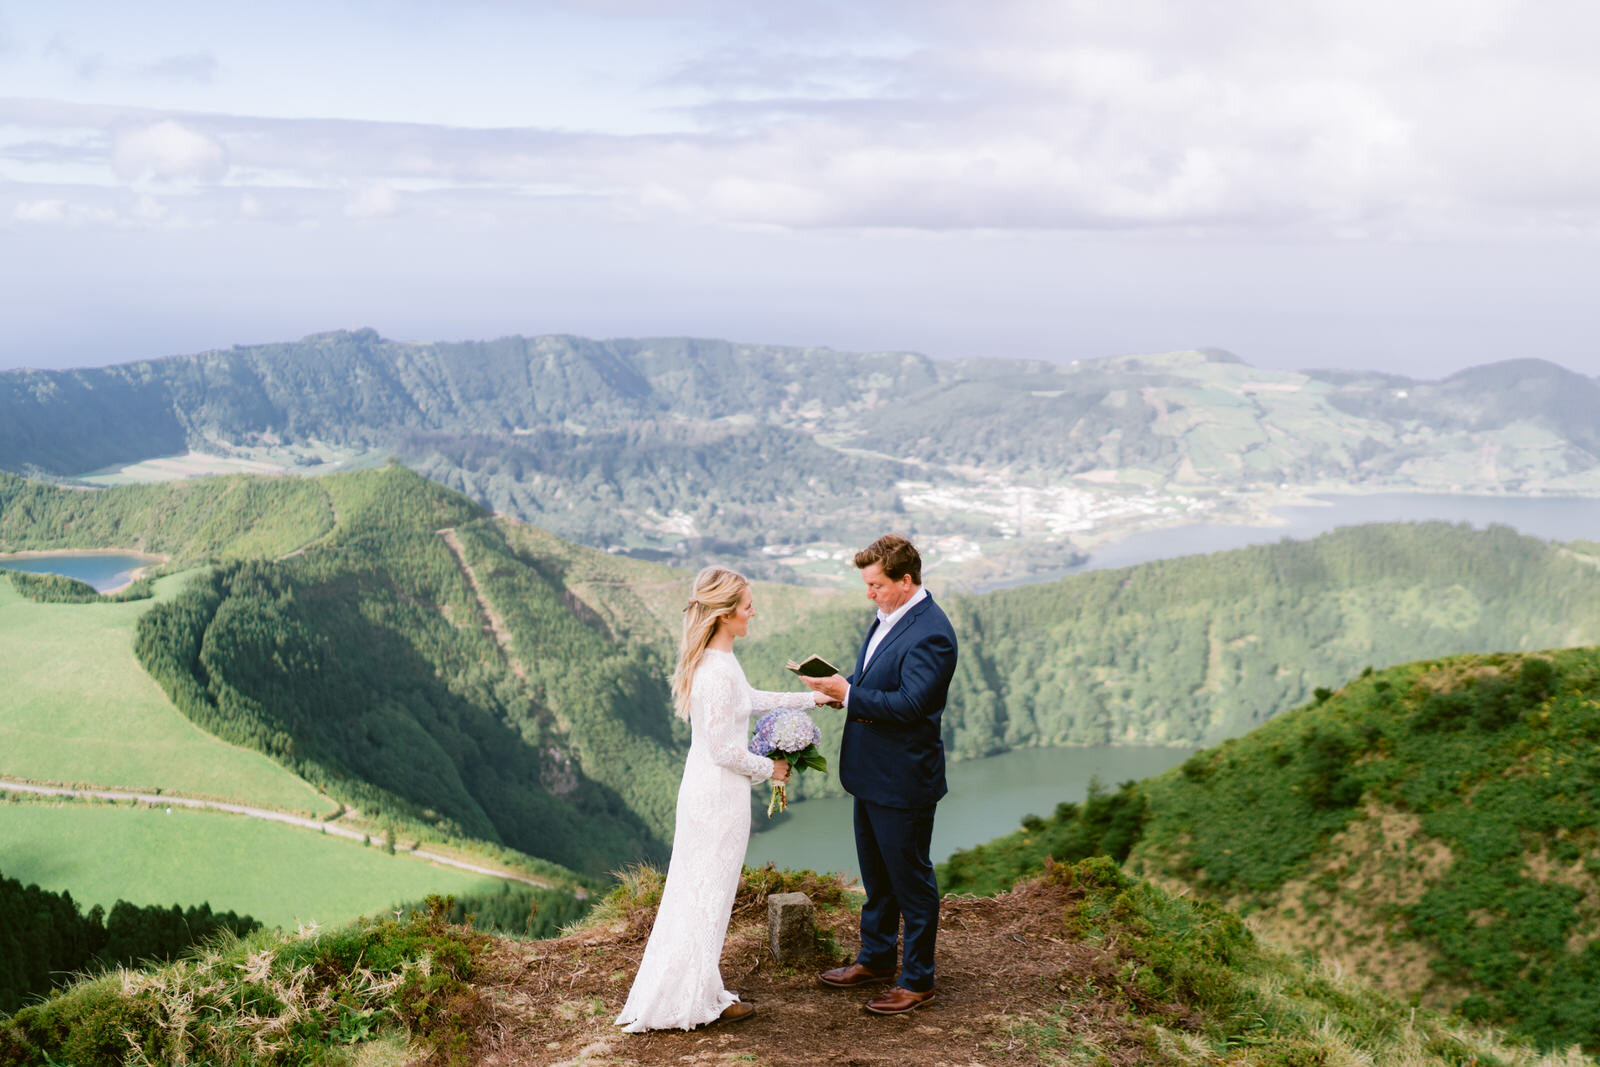 Elopement in the Azores. Cpuple getting married in Portugal. Elopement photography in Europe. Epic locations to elope in the world. Sao Miquel island Azores wedding (32).jpg